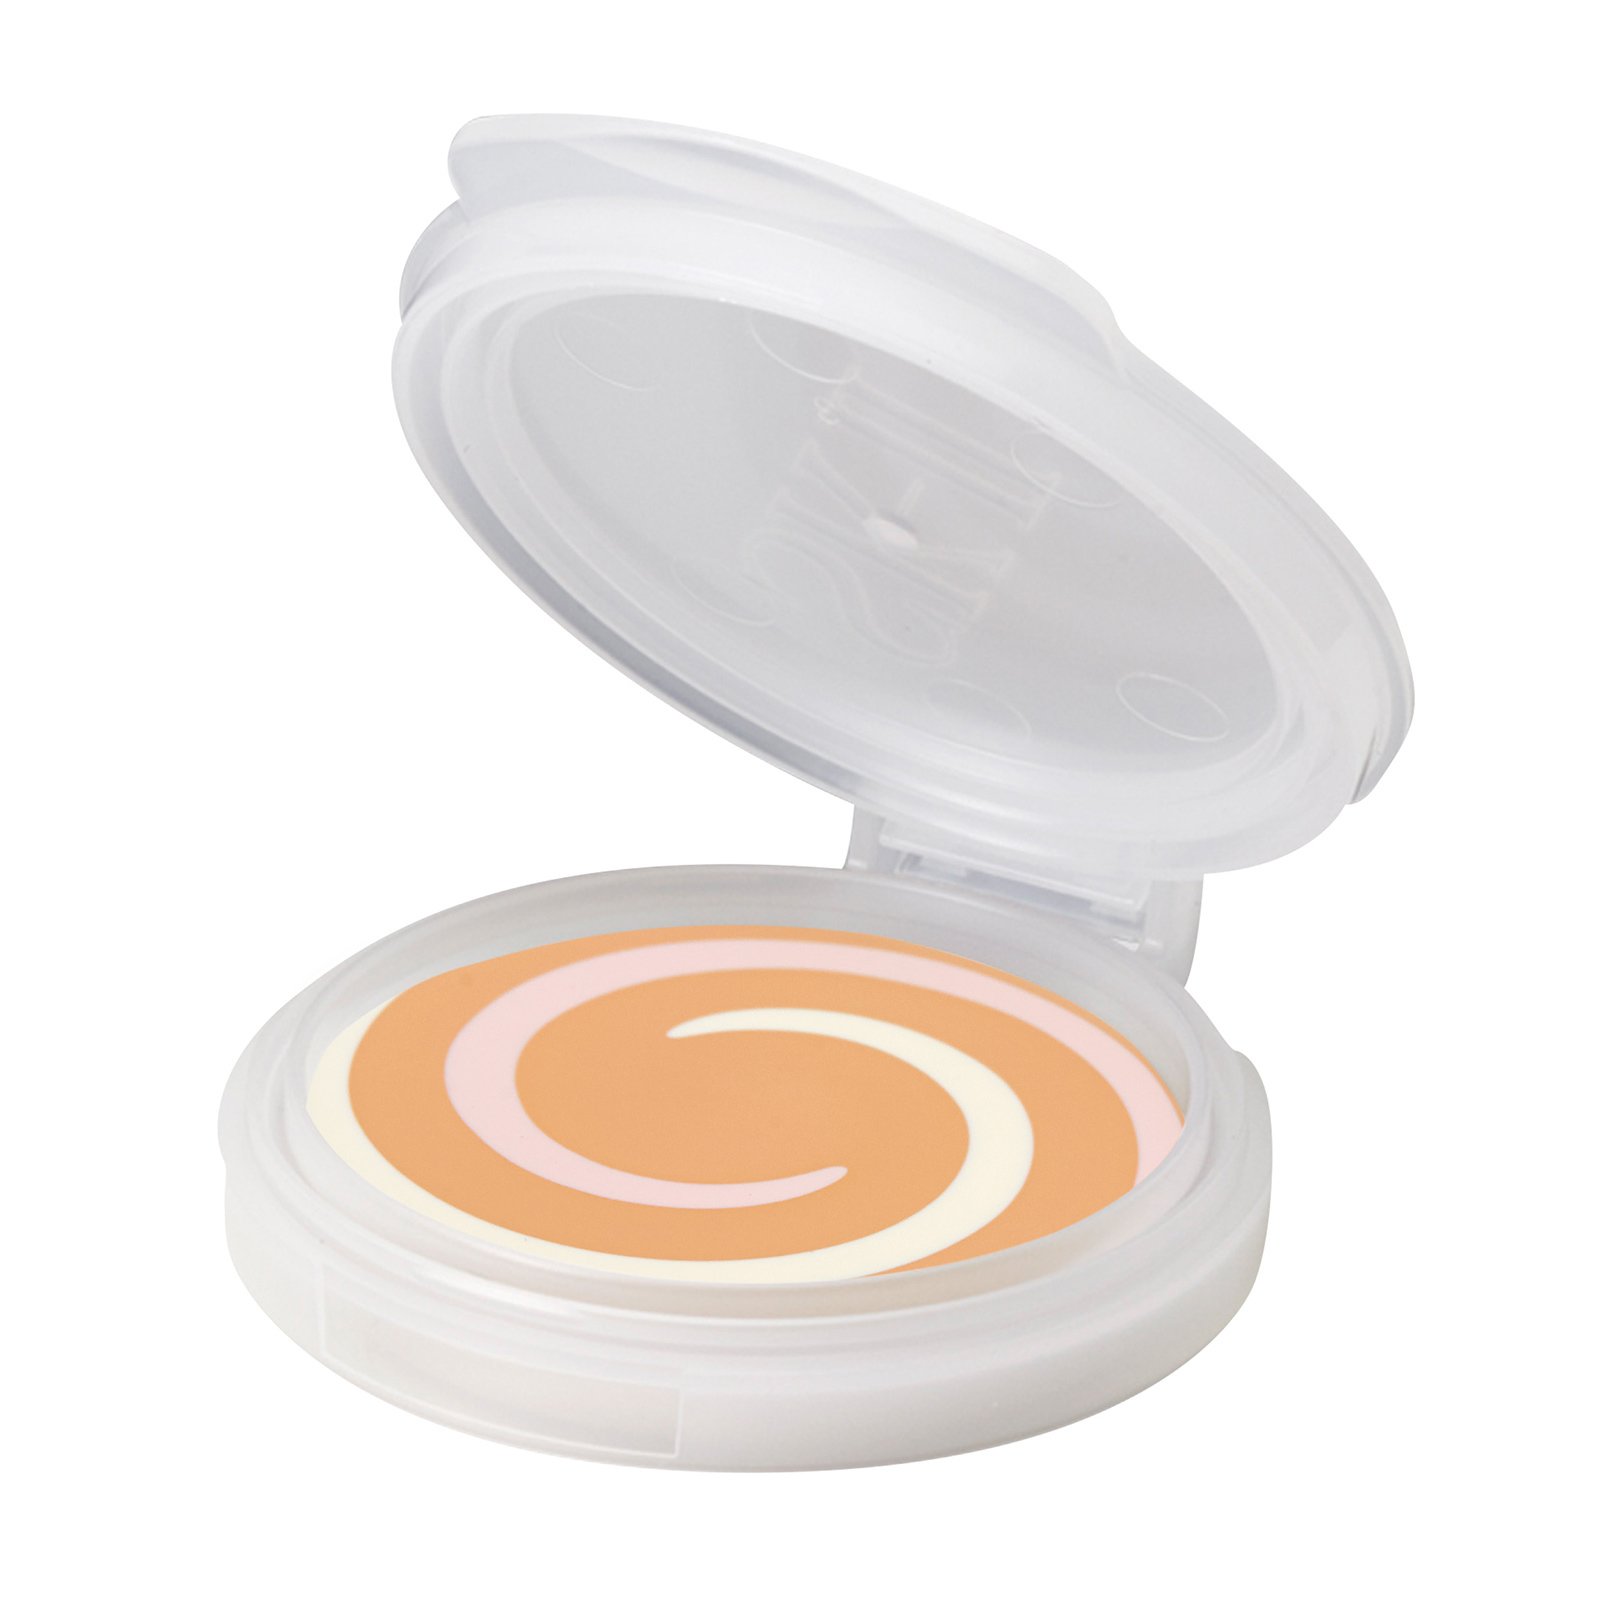 Clear Beauty Enamel Radiant Cream Compact SPF30 / PA+++ (Refill)